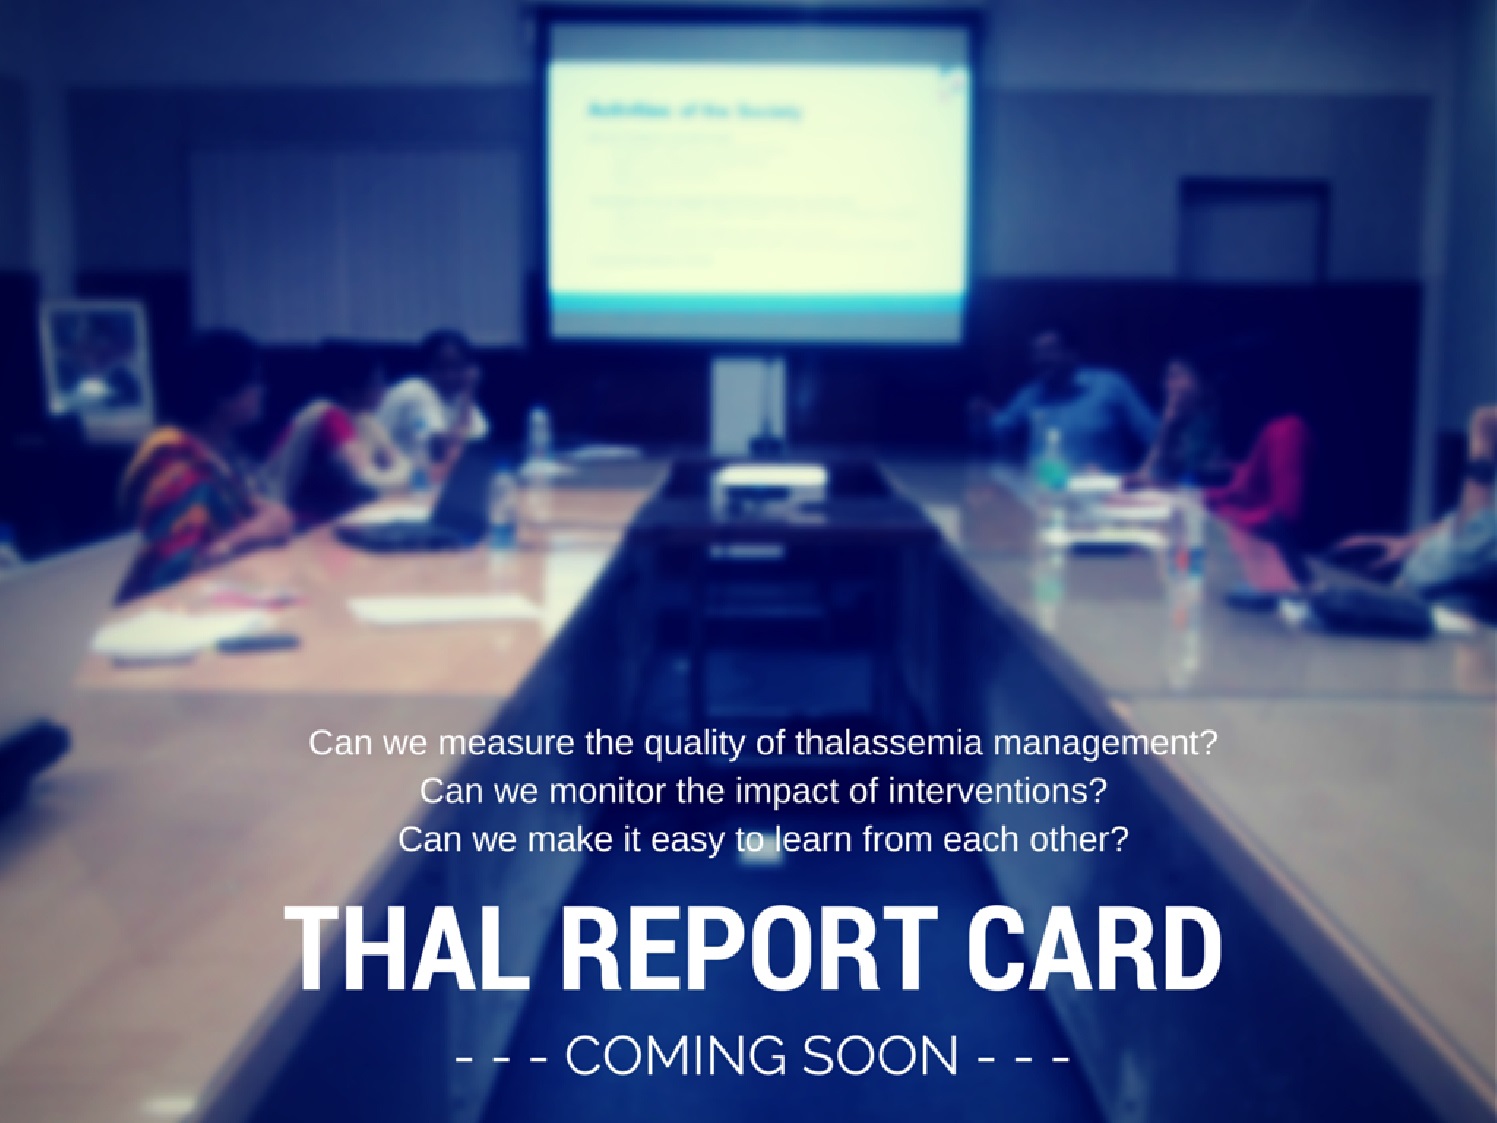 Thal Report Card Coming Soon